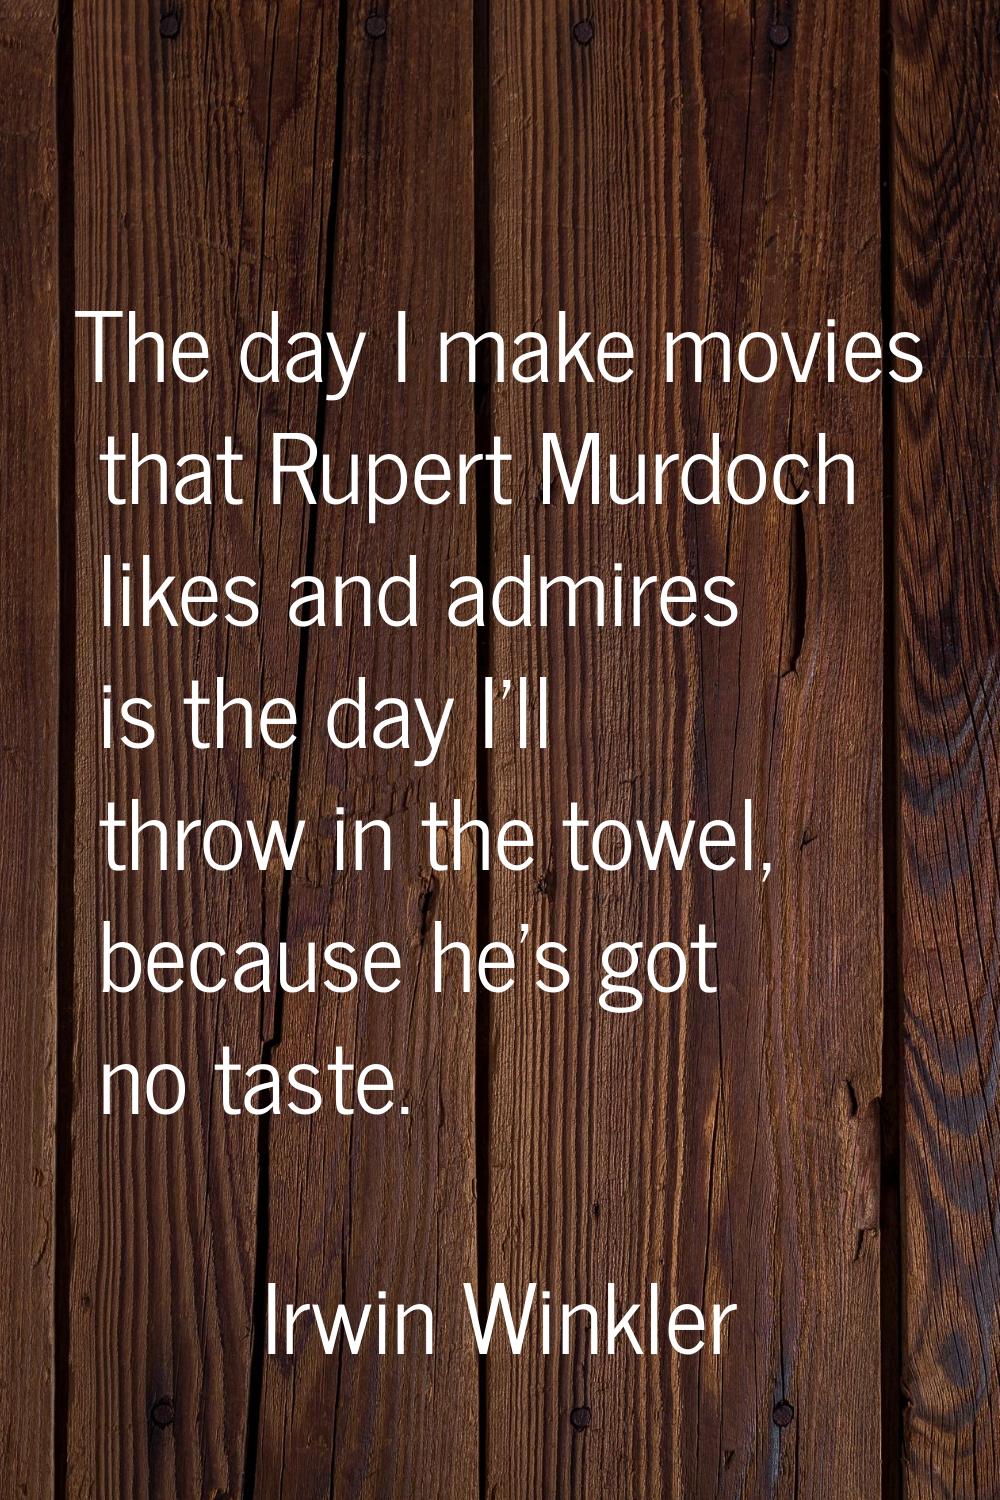 The day I make movies that Rupert Murdoch likes and admires is the day I'll throw in the towel, bec